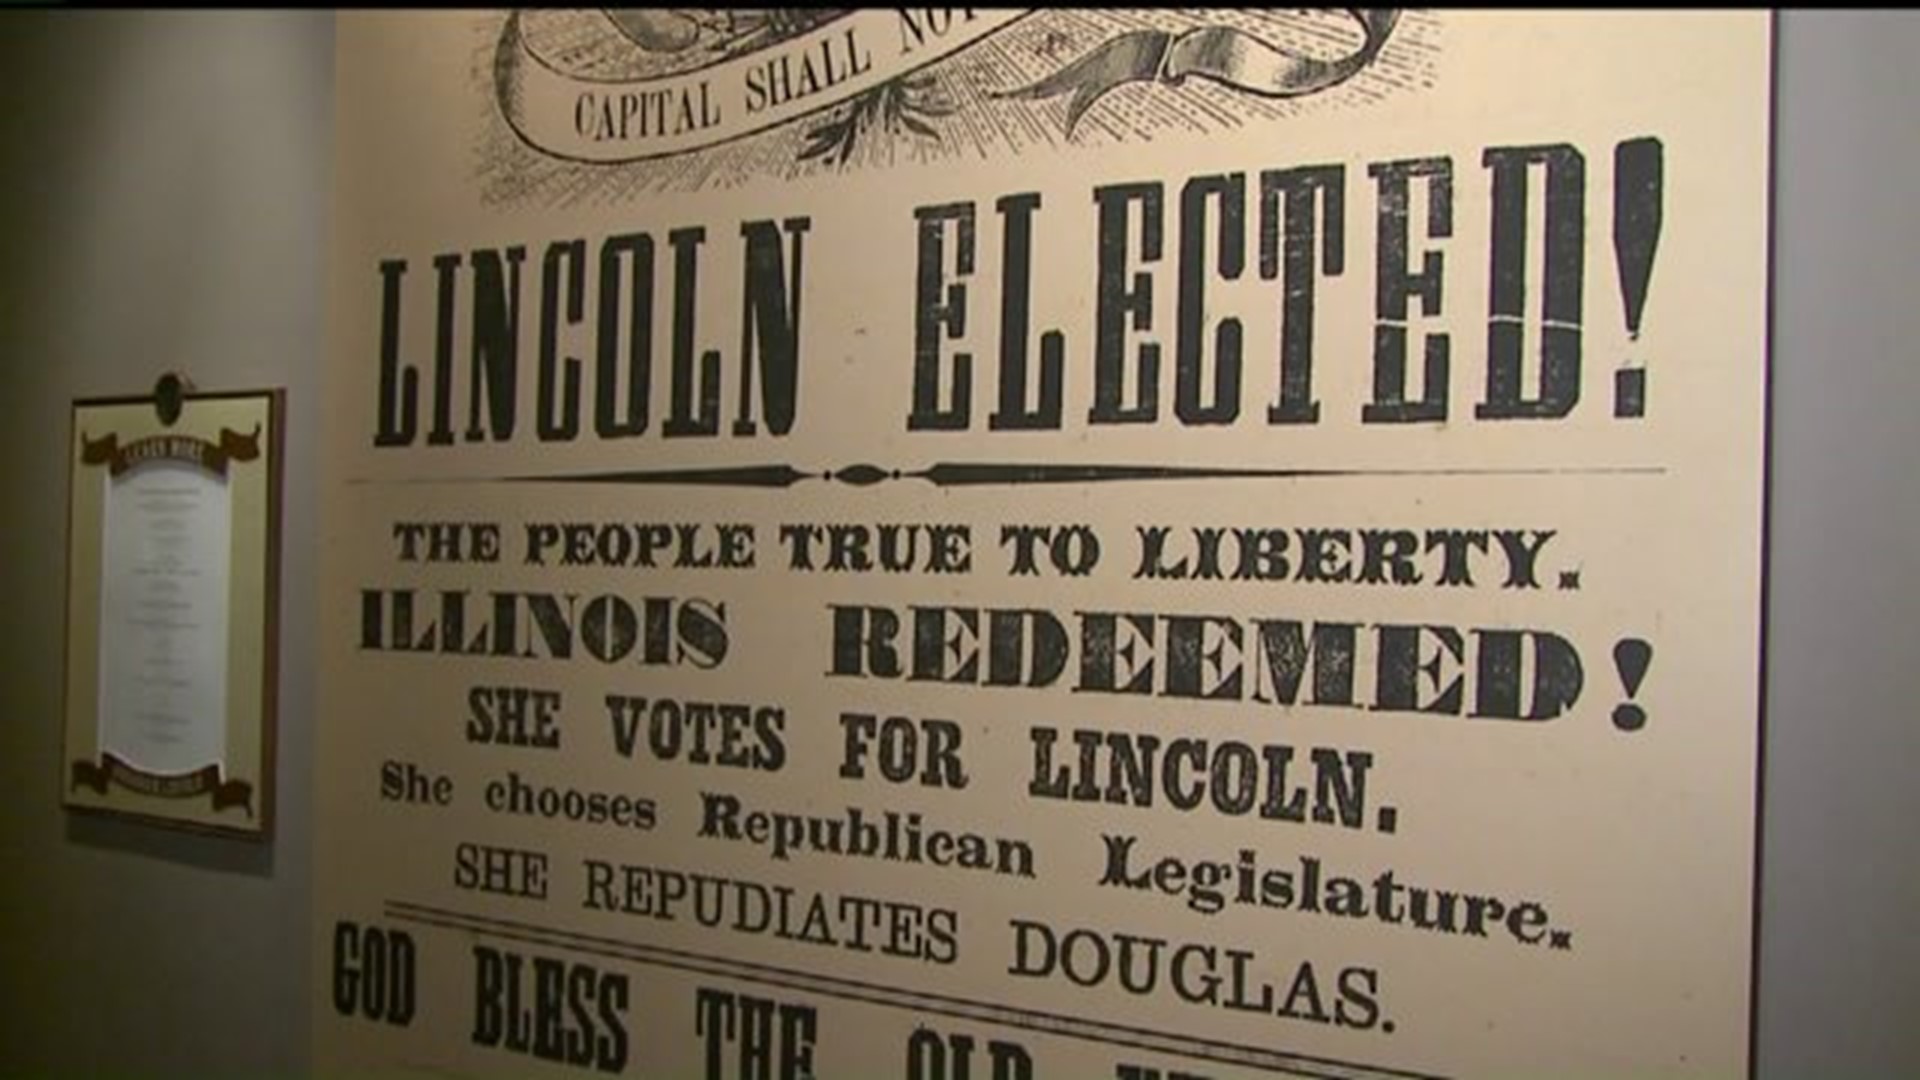 abraham lincoln elected president 1860